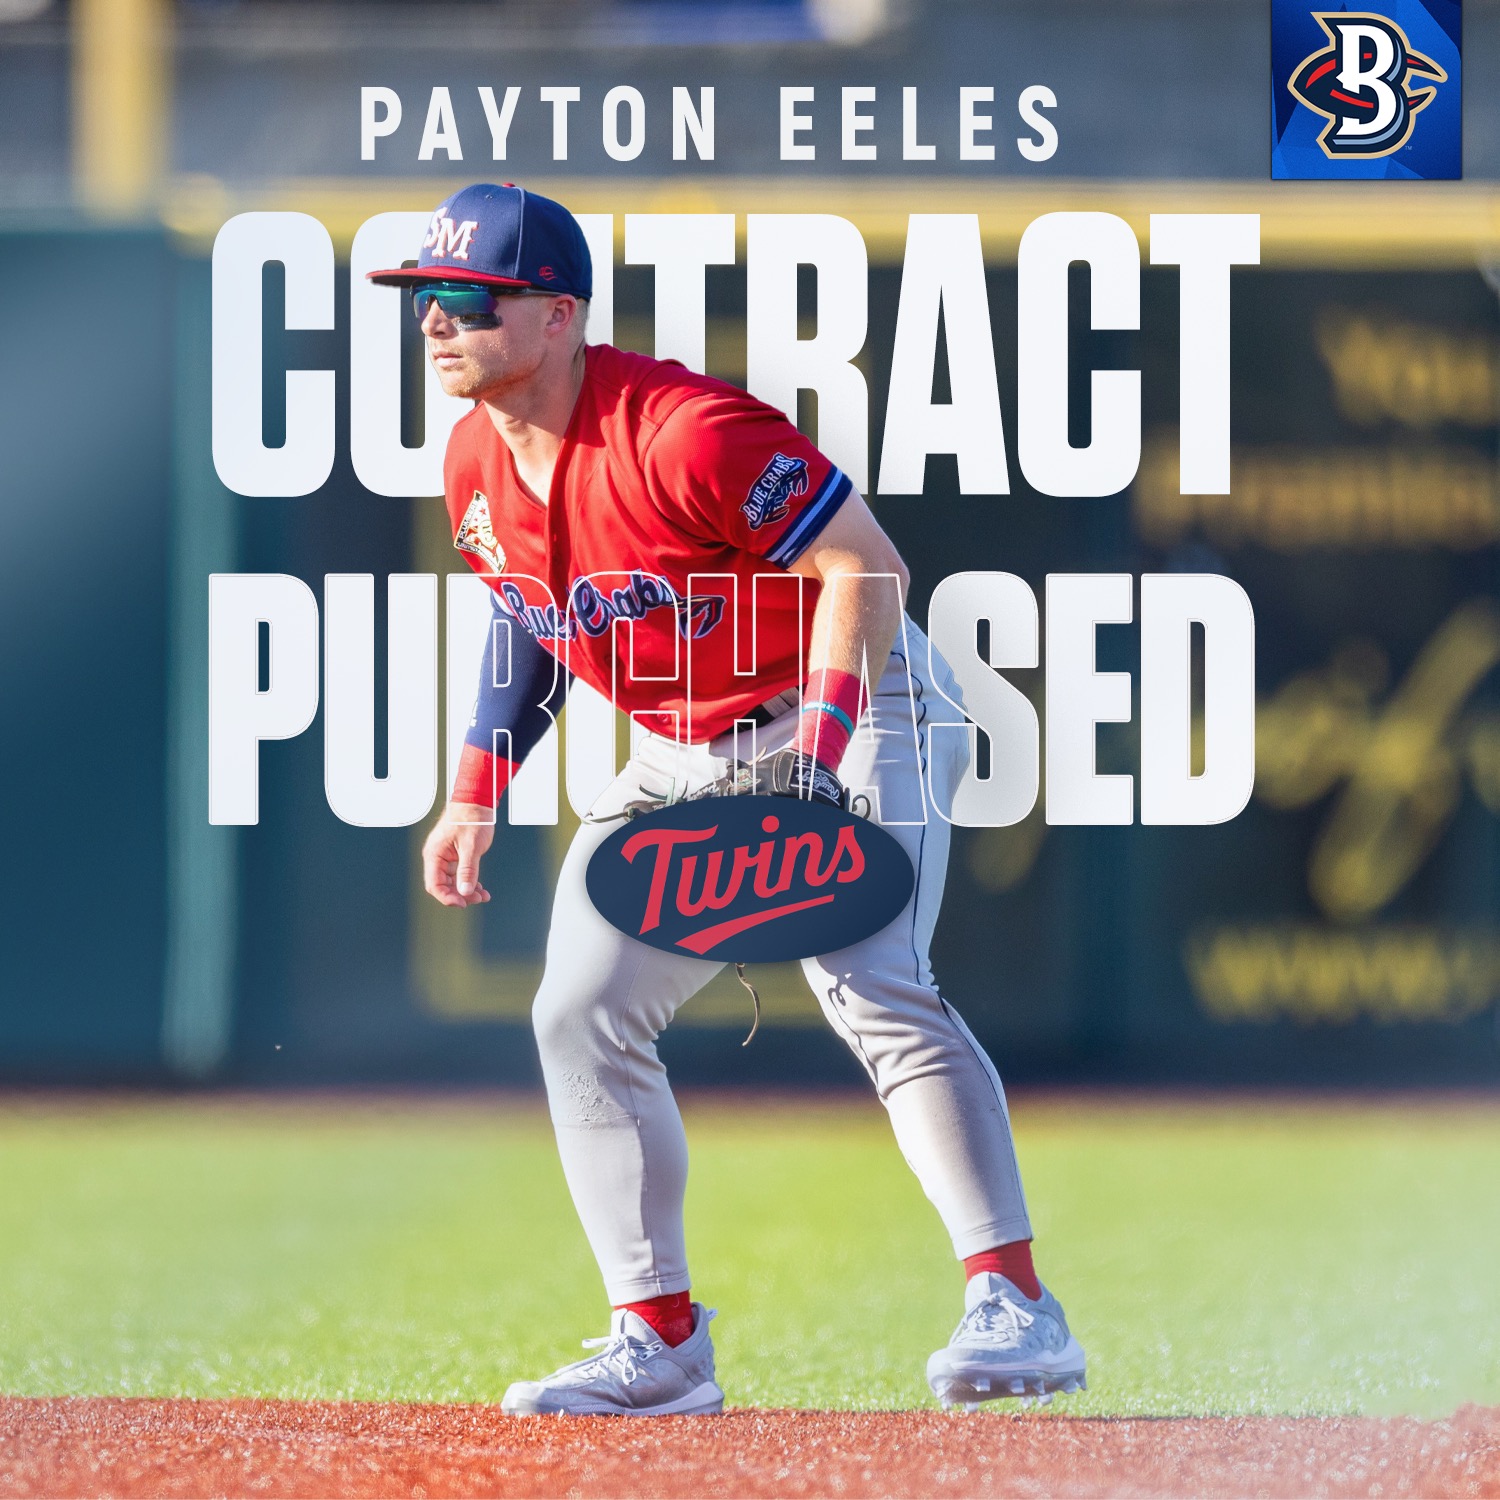 Payton Eeles Has Contract Purchased By Twins